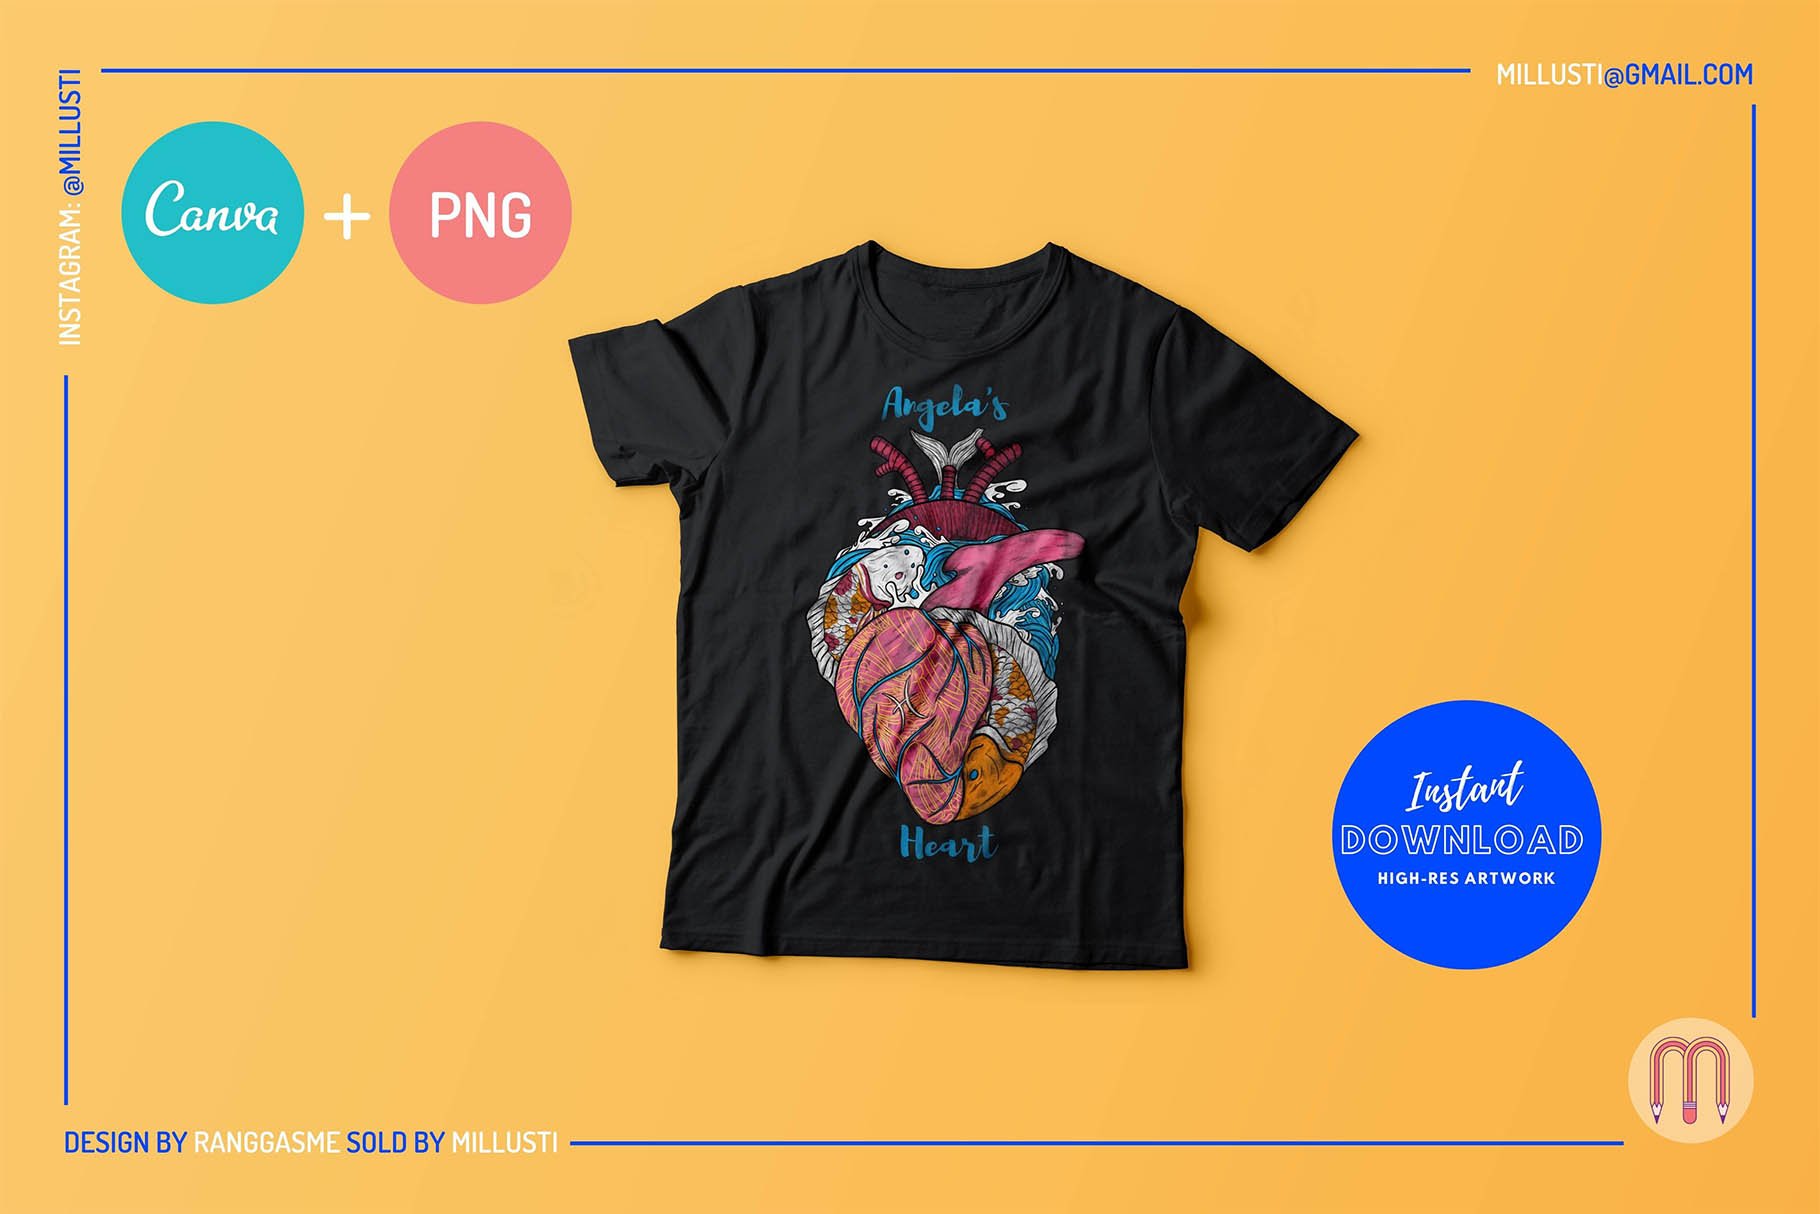 So cool black t-shirt with the astrology heart.